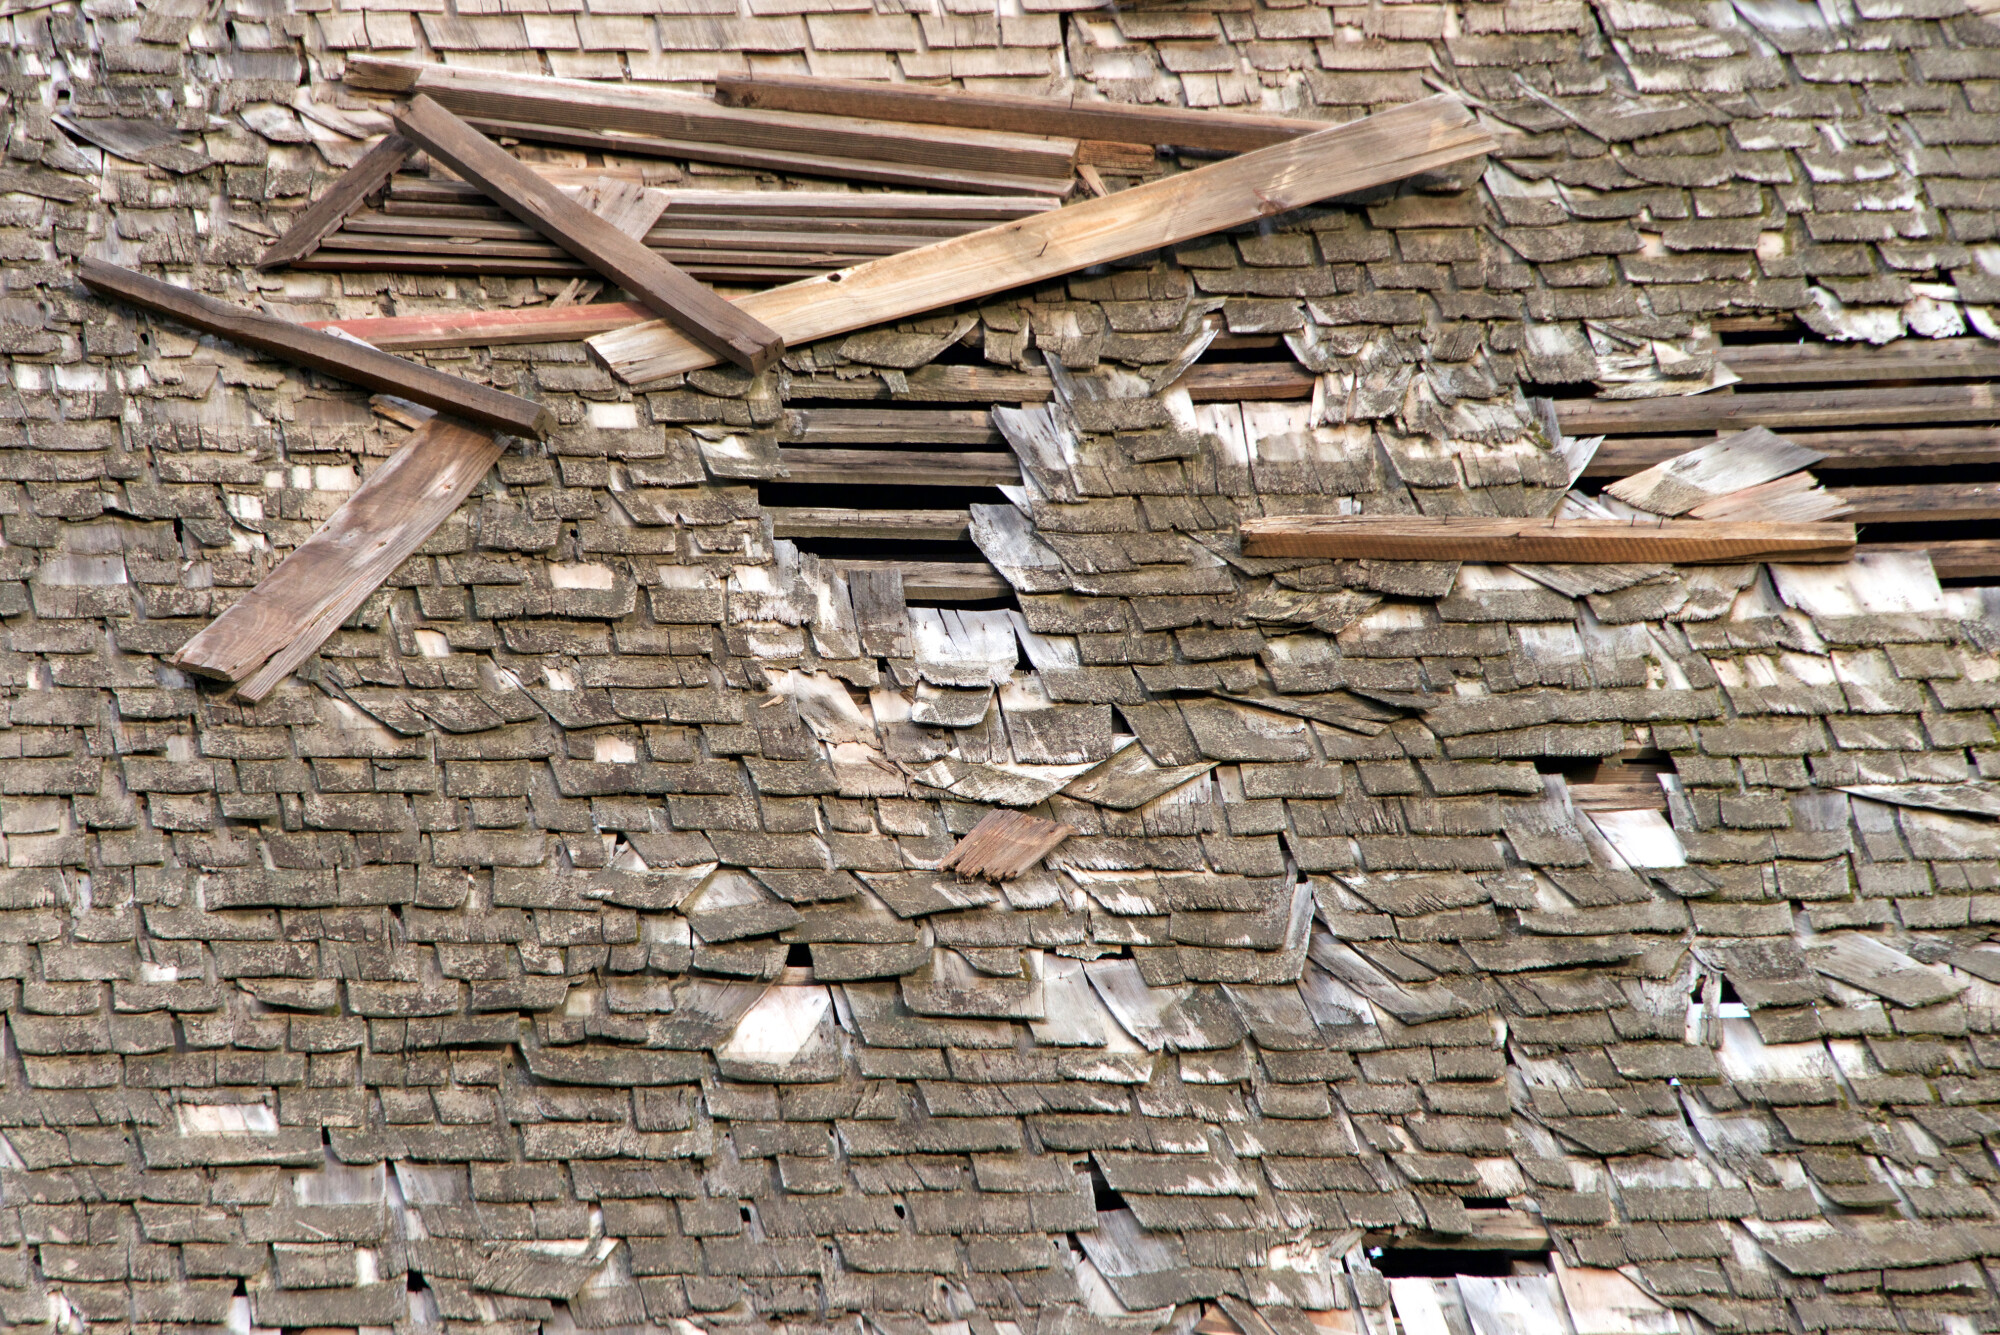 As a homeowner, it is important to recognize the signs of a failing or damaged roof. Here are 4 major signs that you may need a roof replacement.